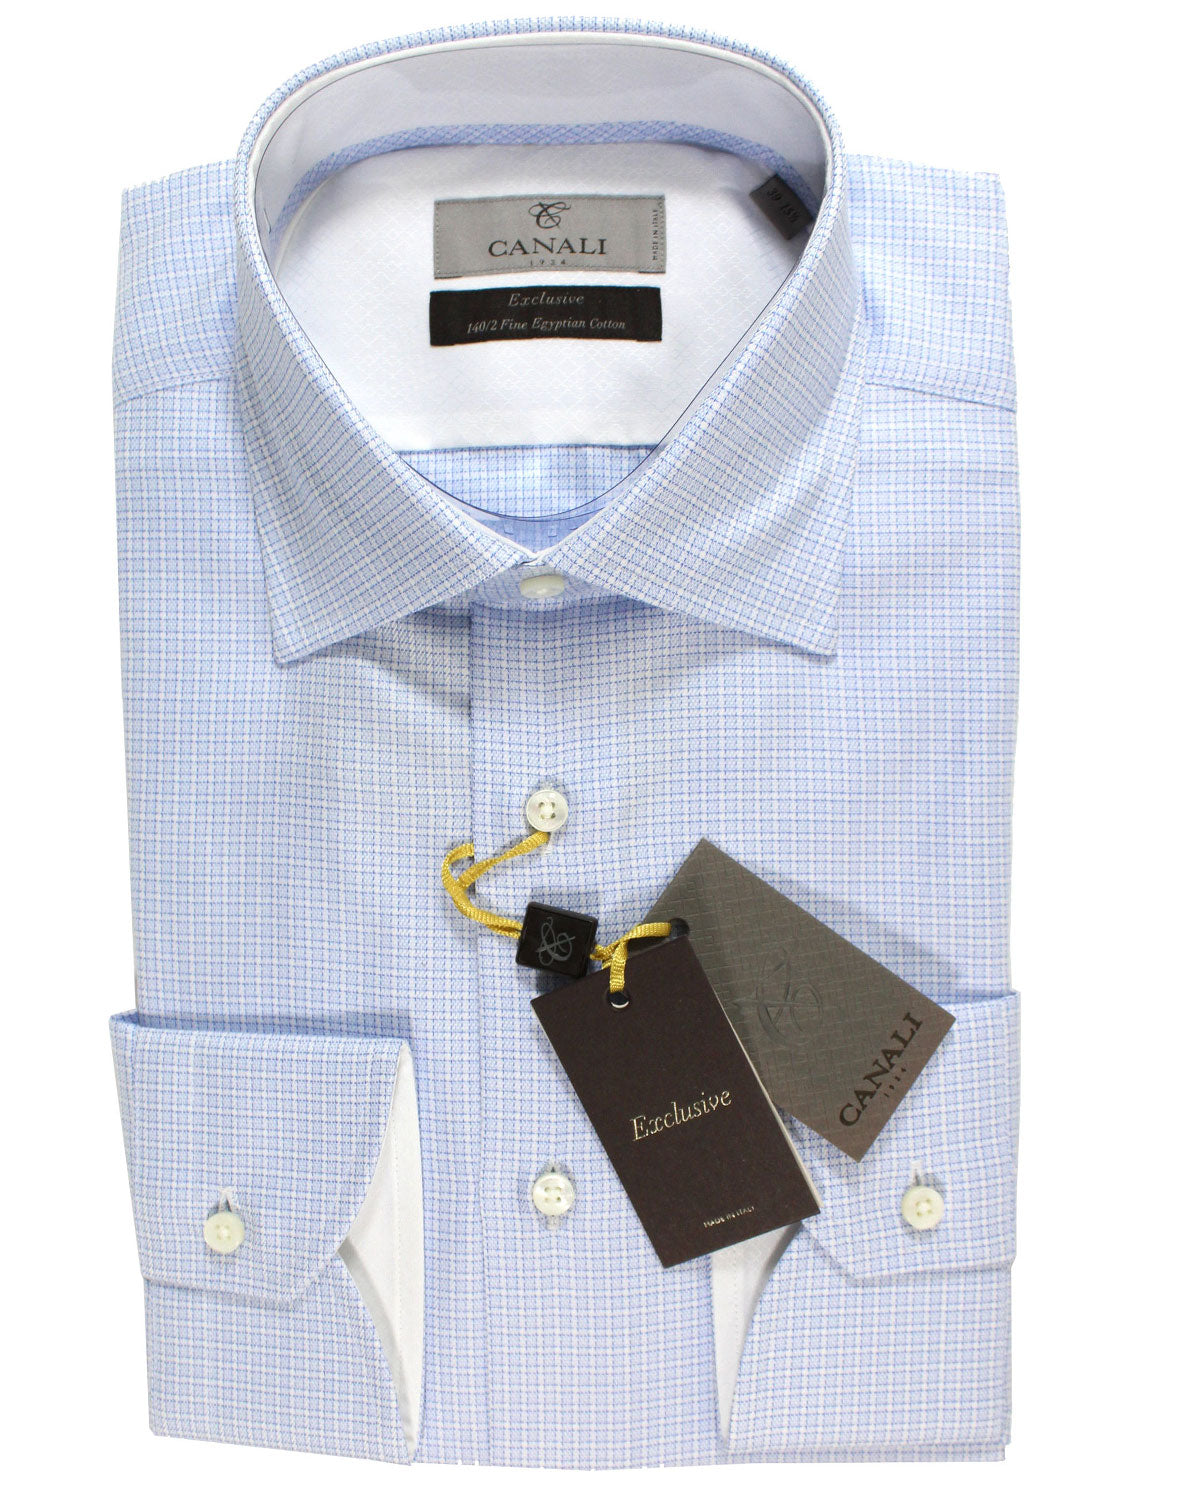 Canali Dress Shirt White Blue Navy Pattern Exclusive Collection